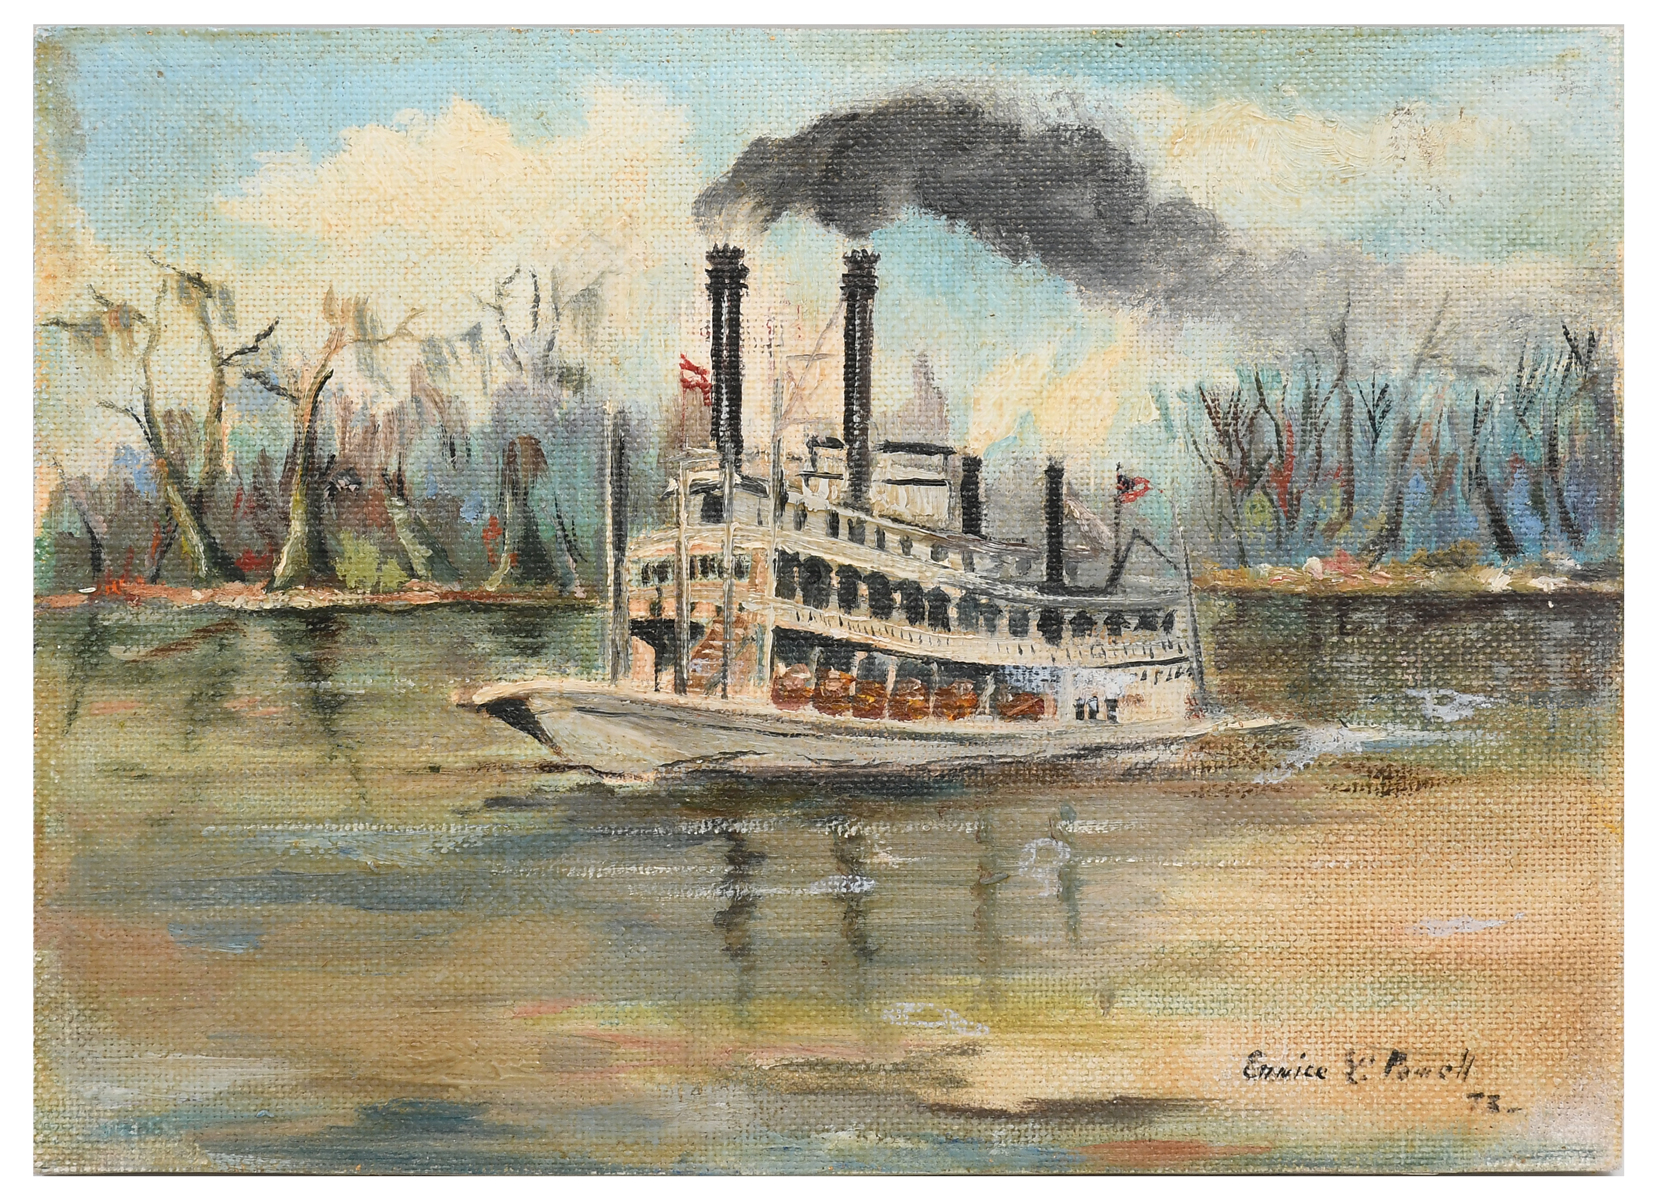 EUNICE POWELL STEAMBOAT PAINTING  276659